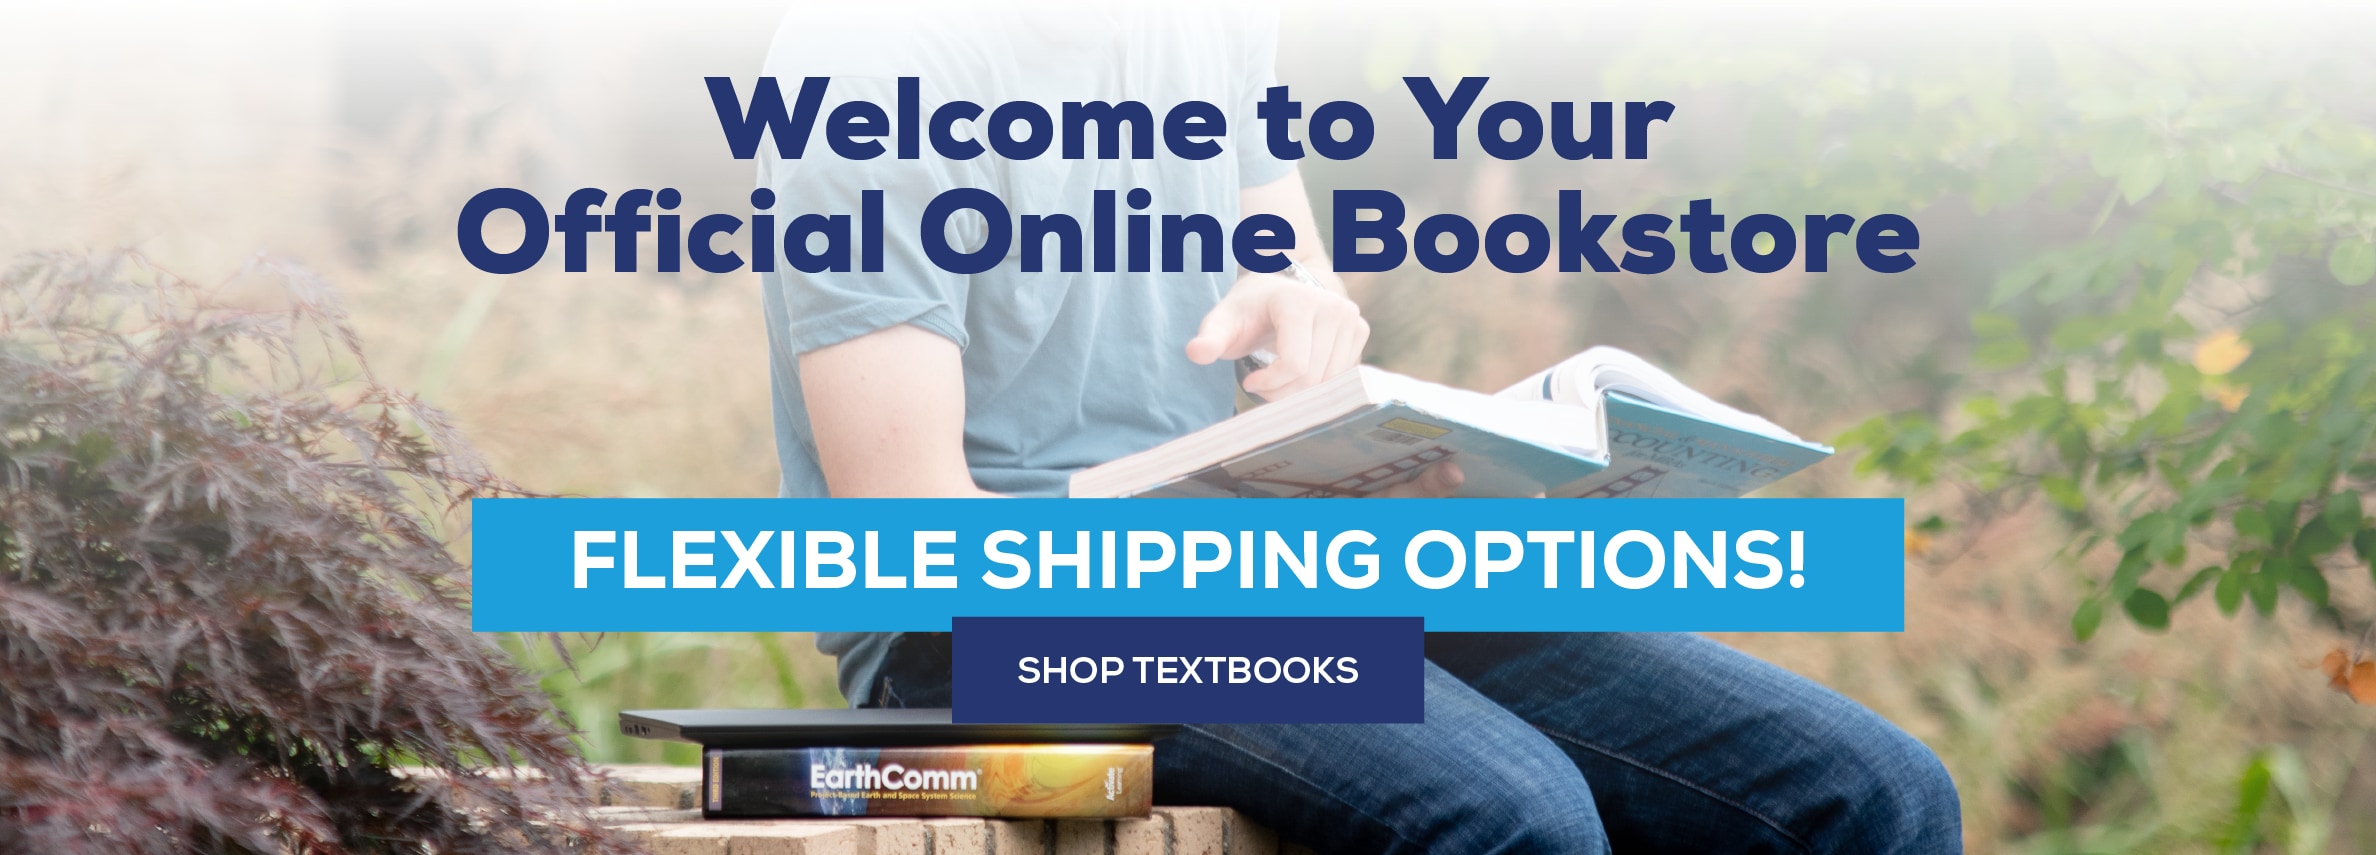 Welcome to Your Official Online Bookstore FLEXIBLE SHIPPING OPTIONS! SHOP TEXTBOOKS